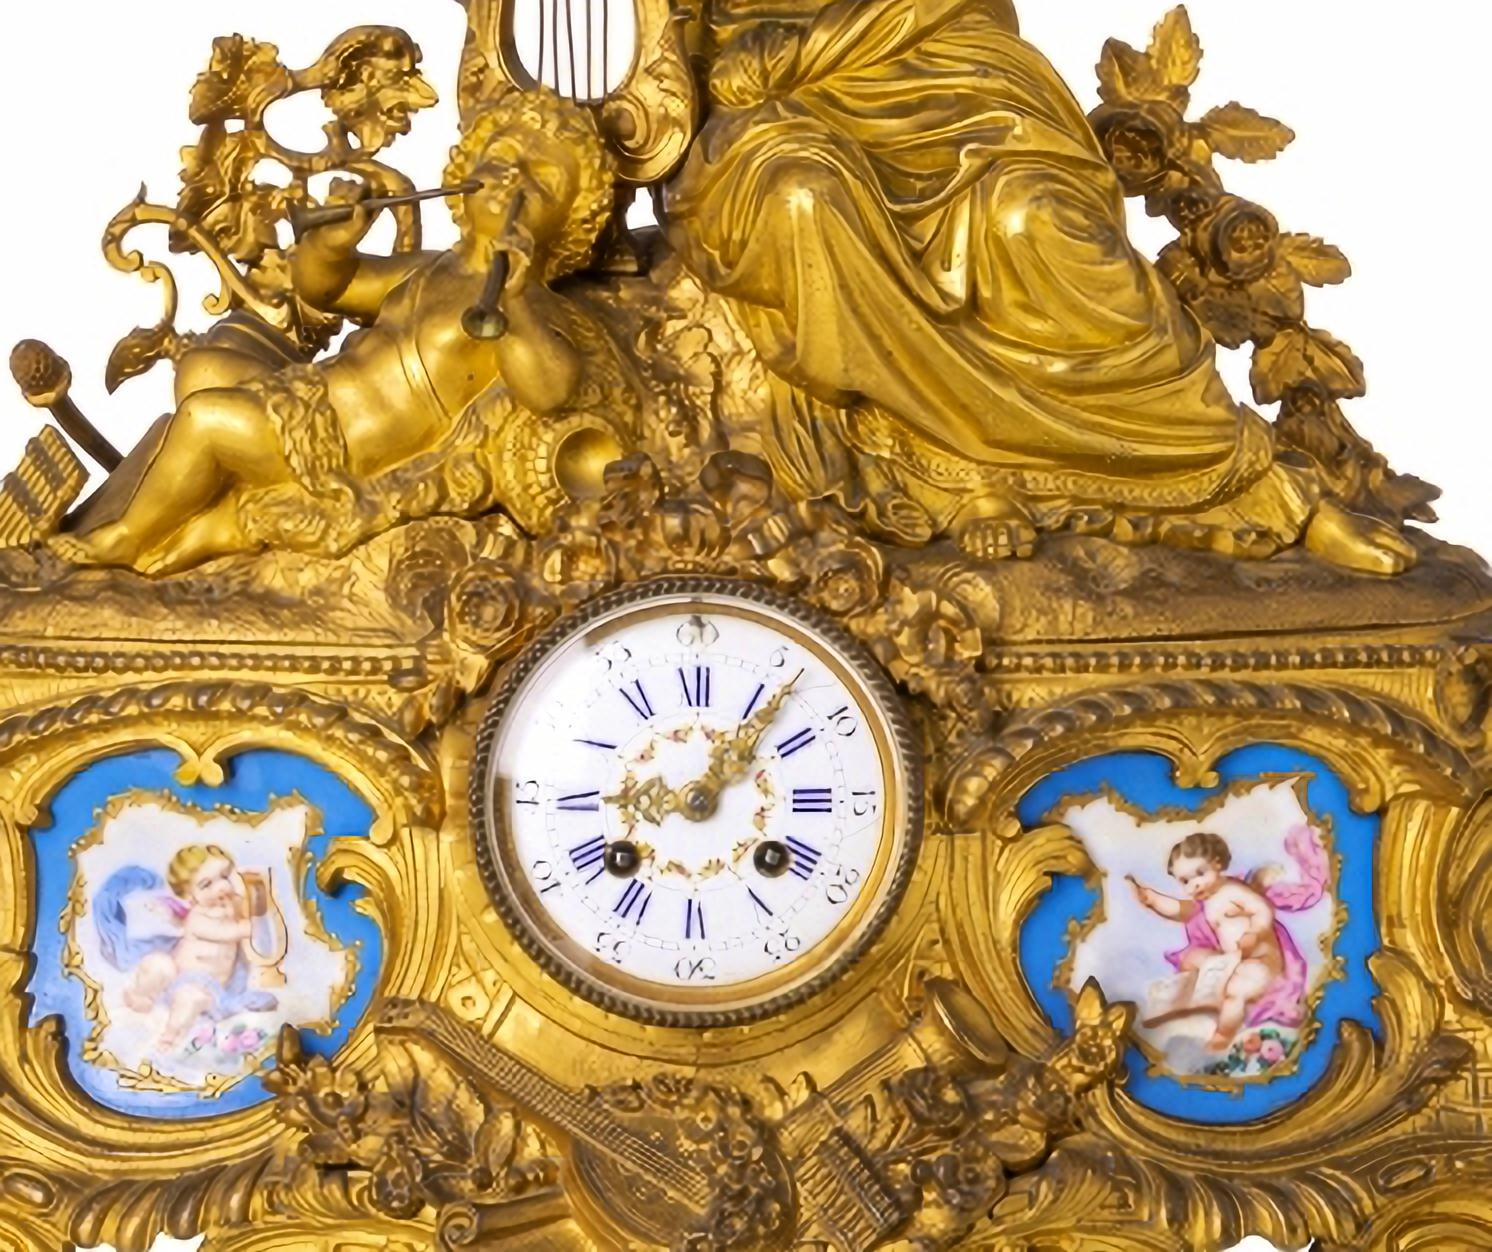 CLOCK AND PAIR OF CANDLESTICKS

French
19th Century
Napoleon III,
in relief and gilt bronze, allegory to music, with painted porcelain plaques, by Sévres.
Enamelled dial with black Roman and Arabic numerals, eight-day autonomy, strikes hours